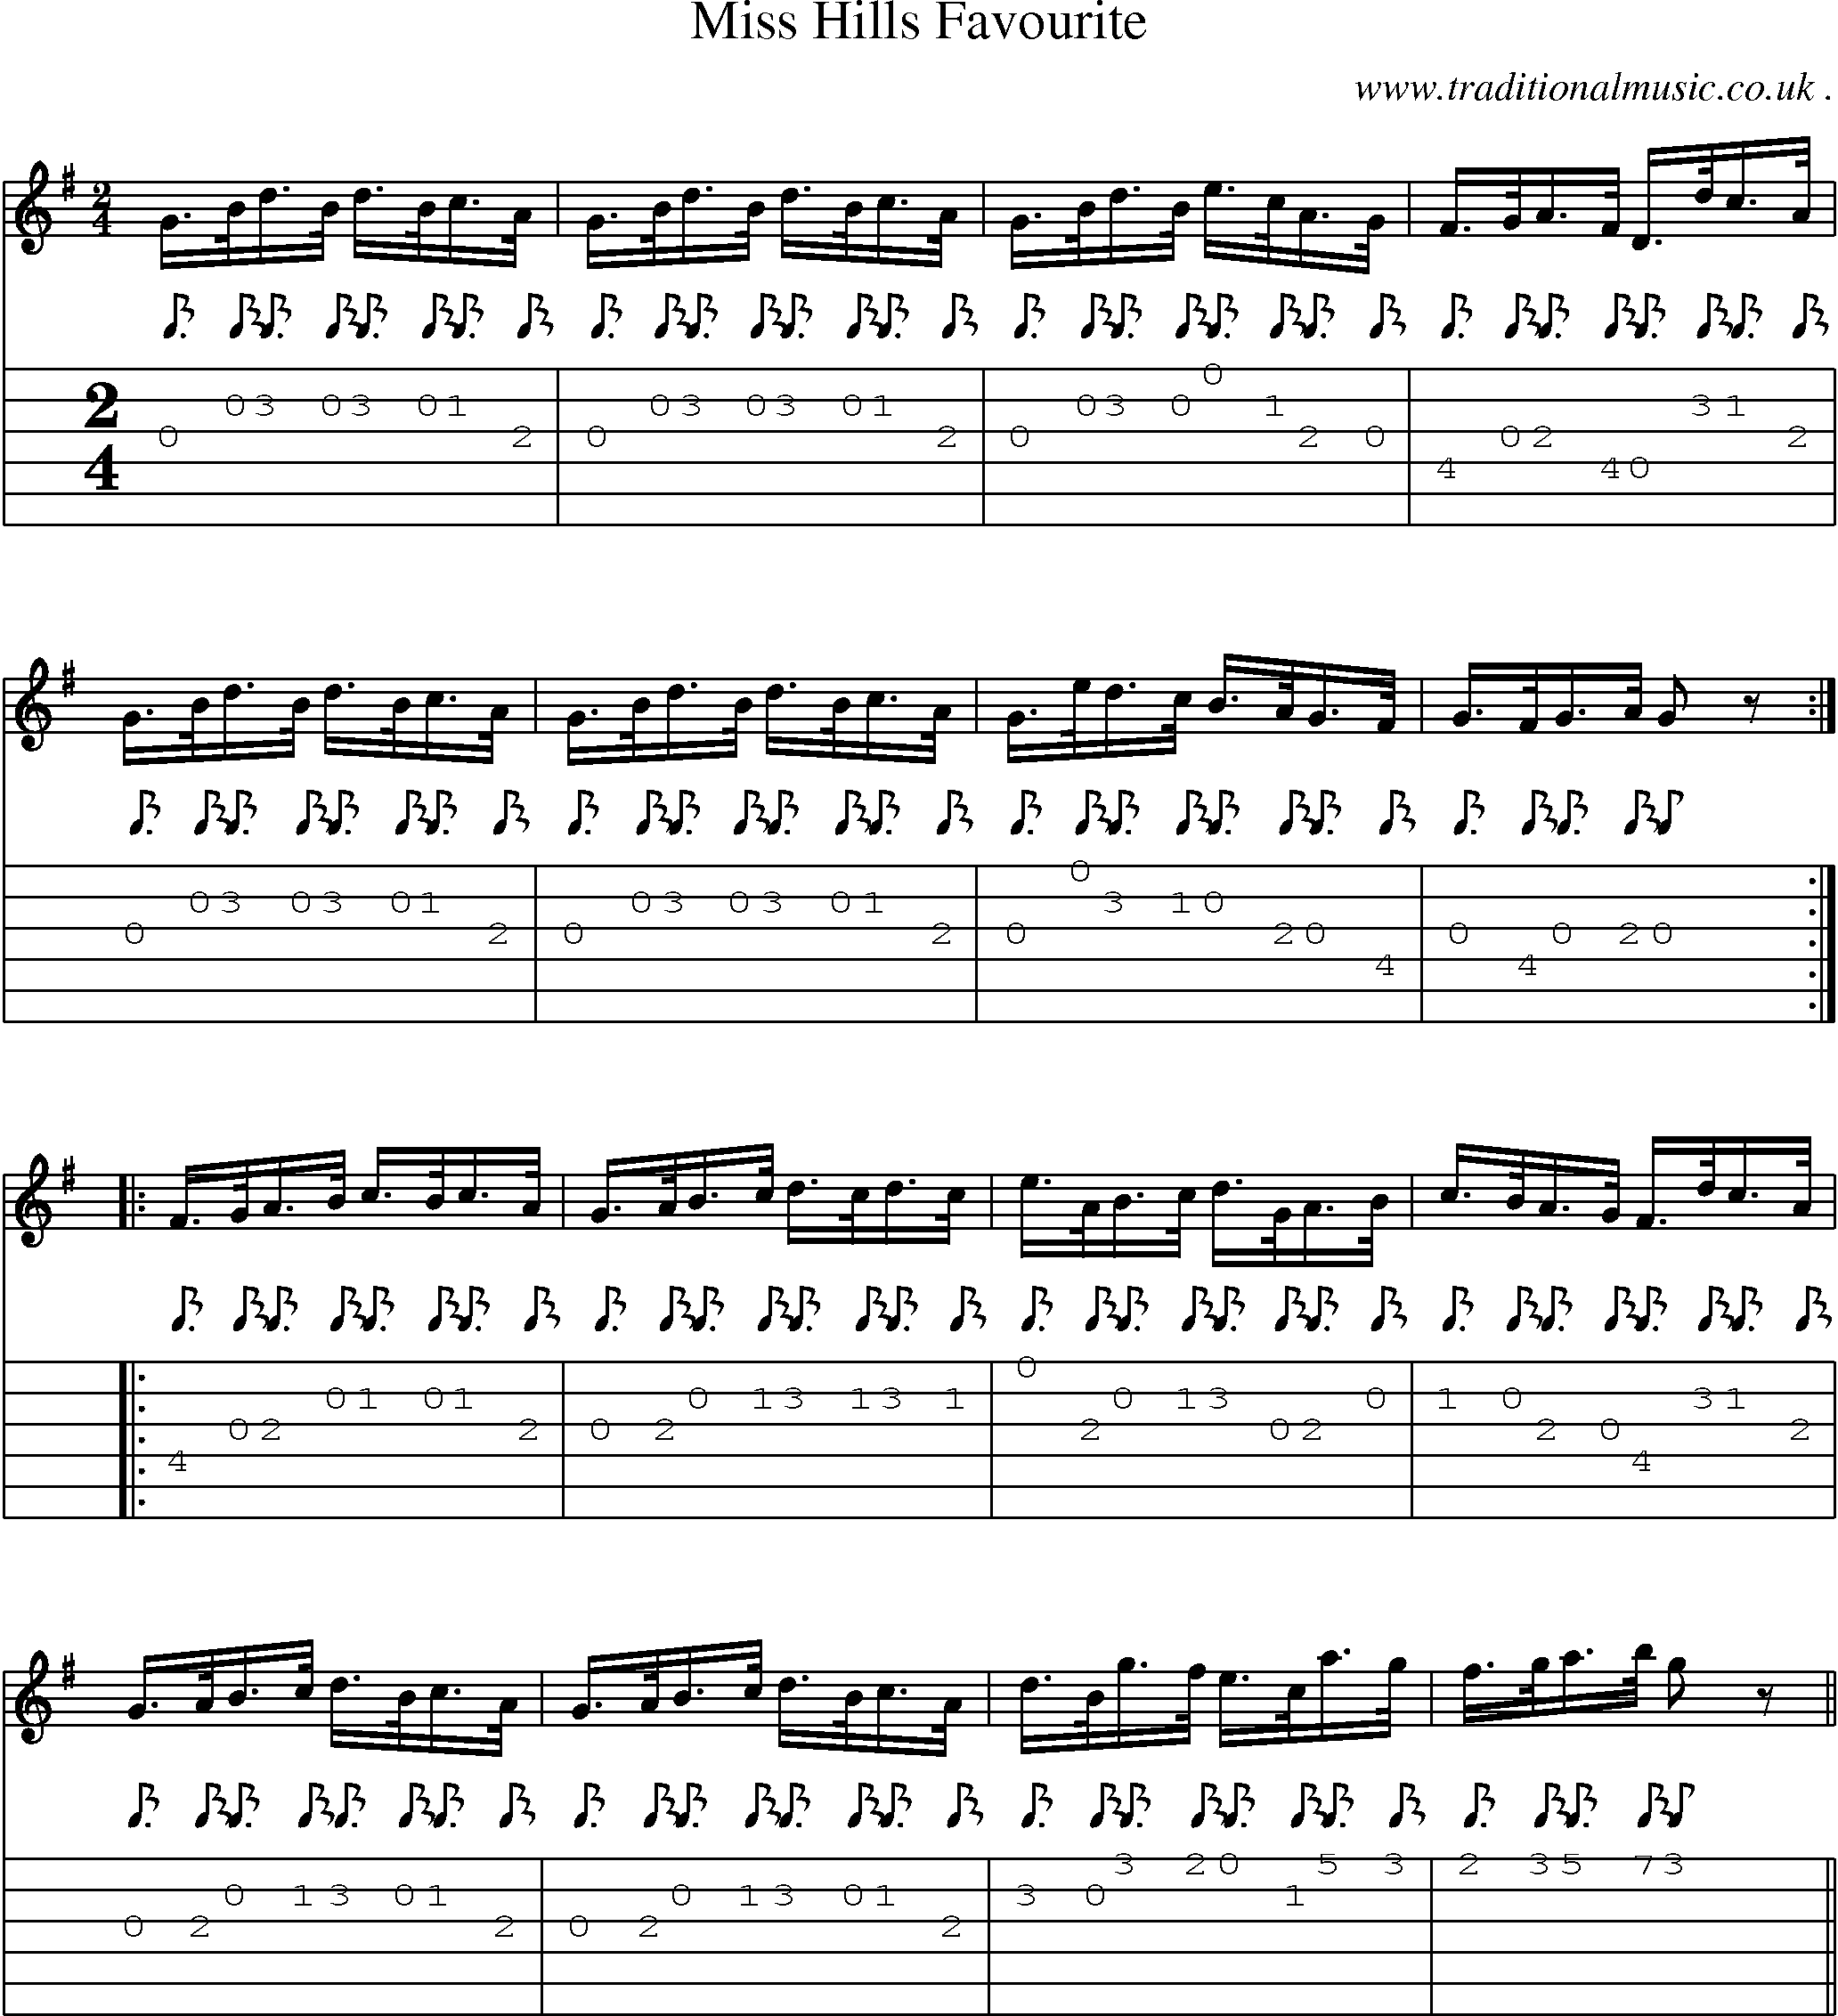 Sheet-Music and Guitar Tabs for Miss Hills Favourite